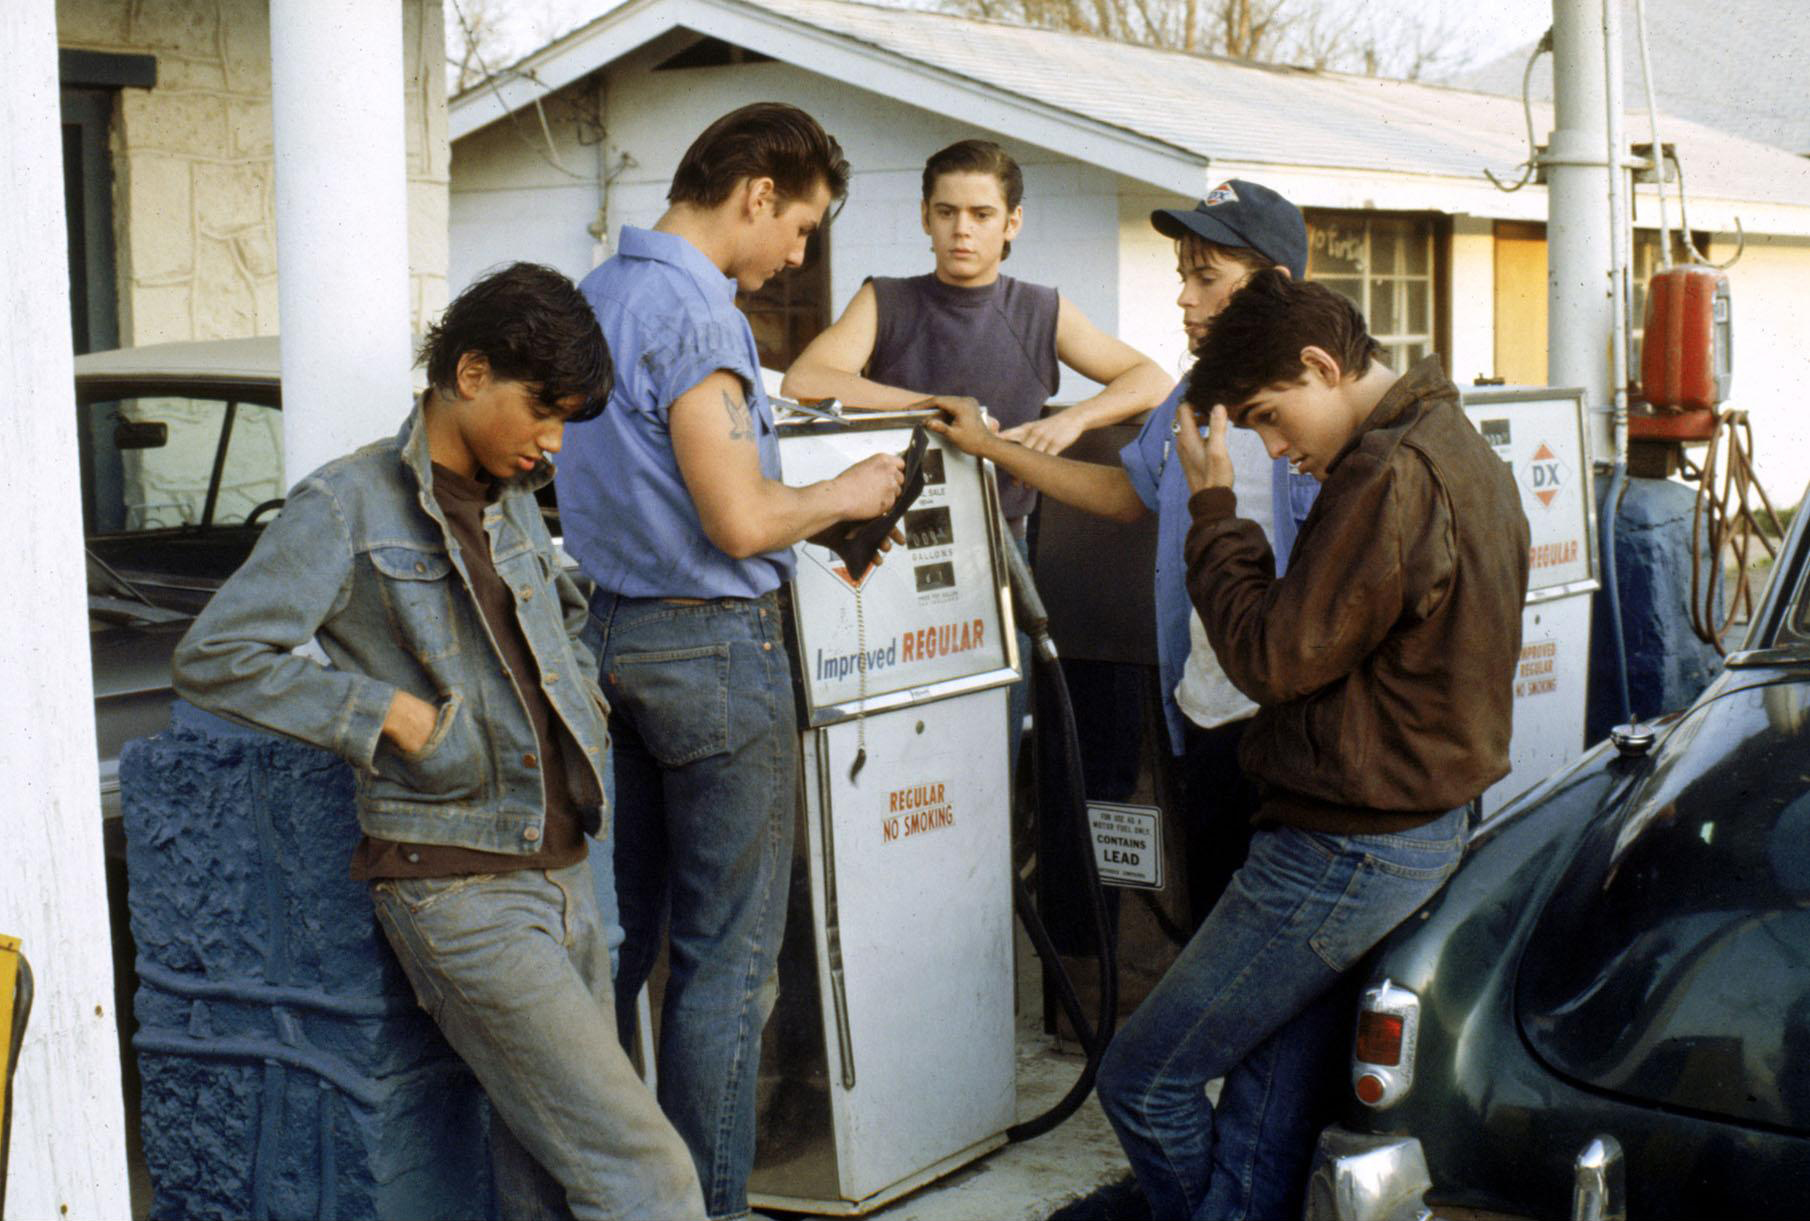 the-outsiders